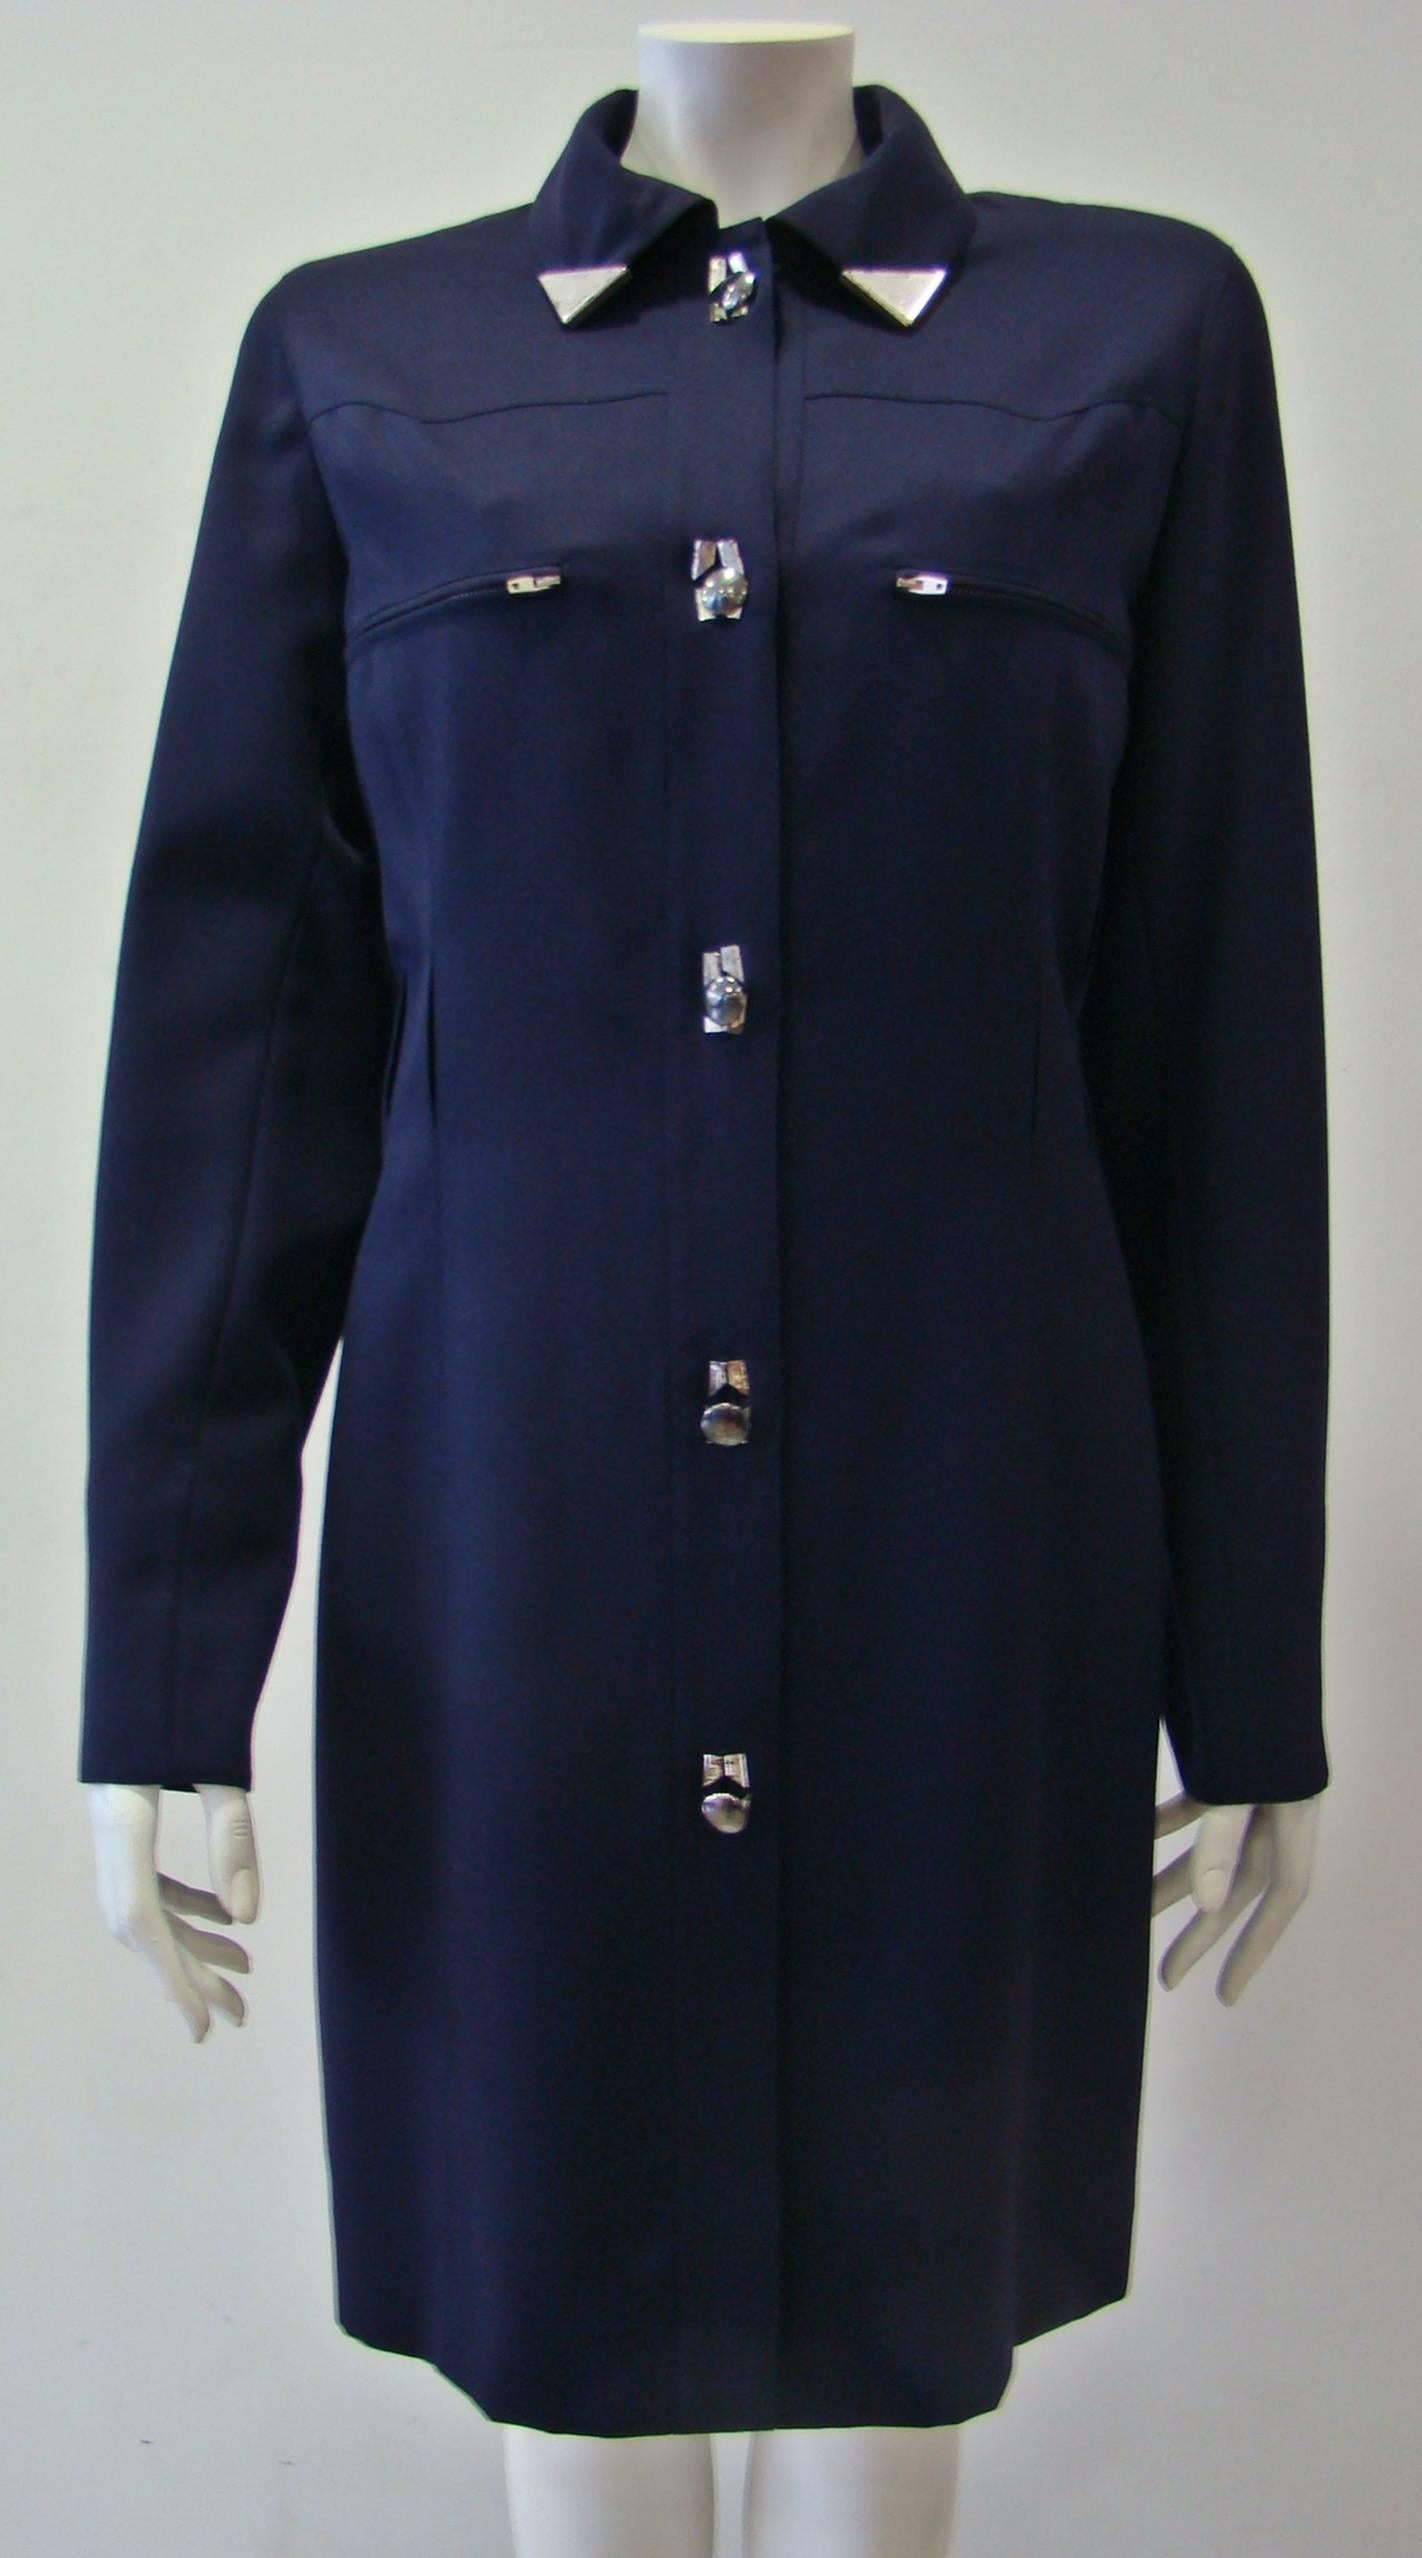 Crafted From Warm Wool This Claude Montana Navy Blue Dress Features Metal Tips In The Collar And Along The Front Buttoning. A Straight Line Dress With Two Zip Chest Pockets And Three Fuctional Buttons At Cuffs, Which Has Two Cut-Outs At The Waist So